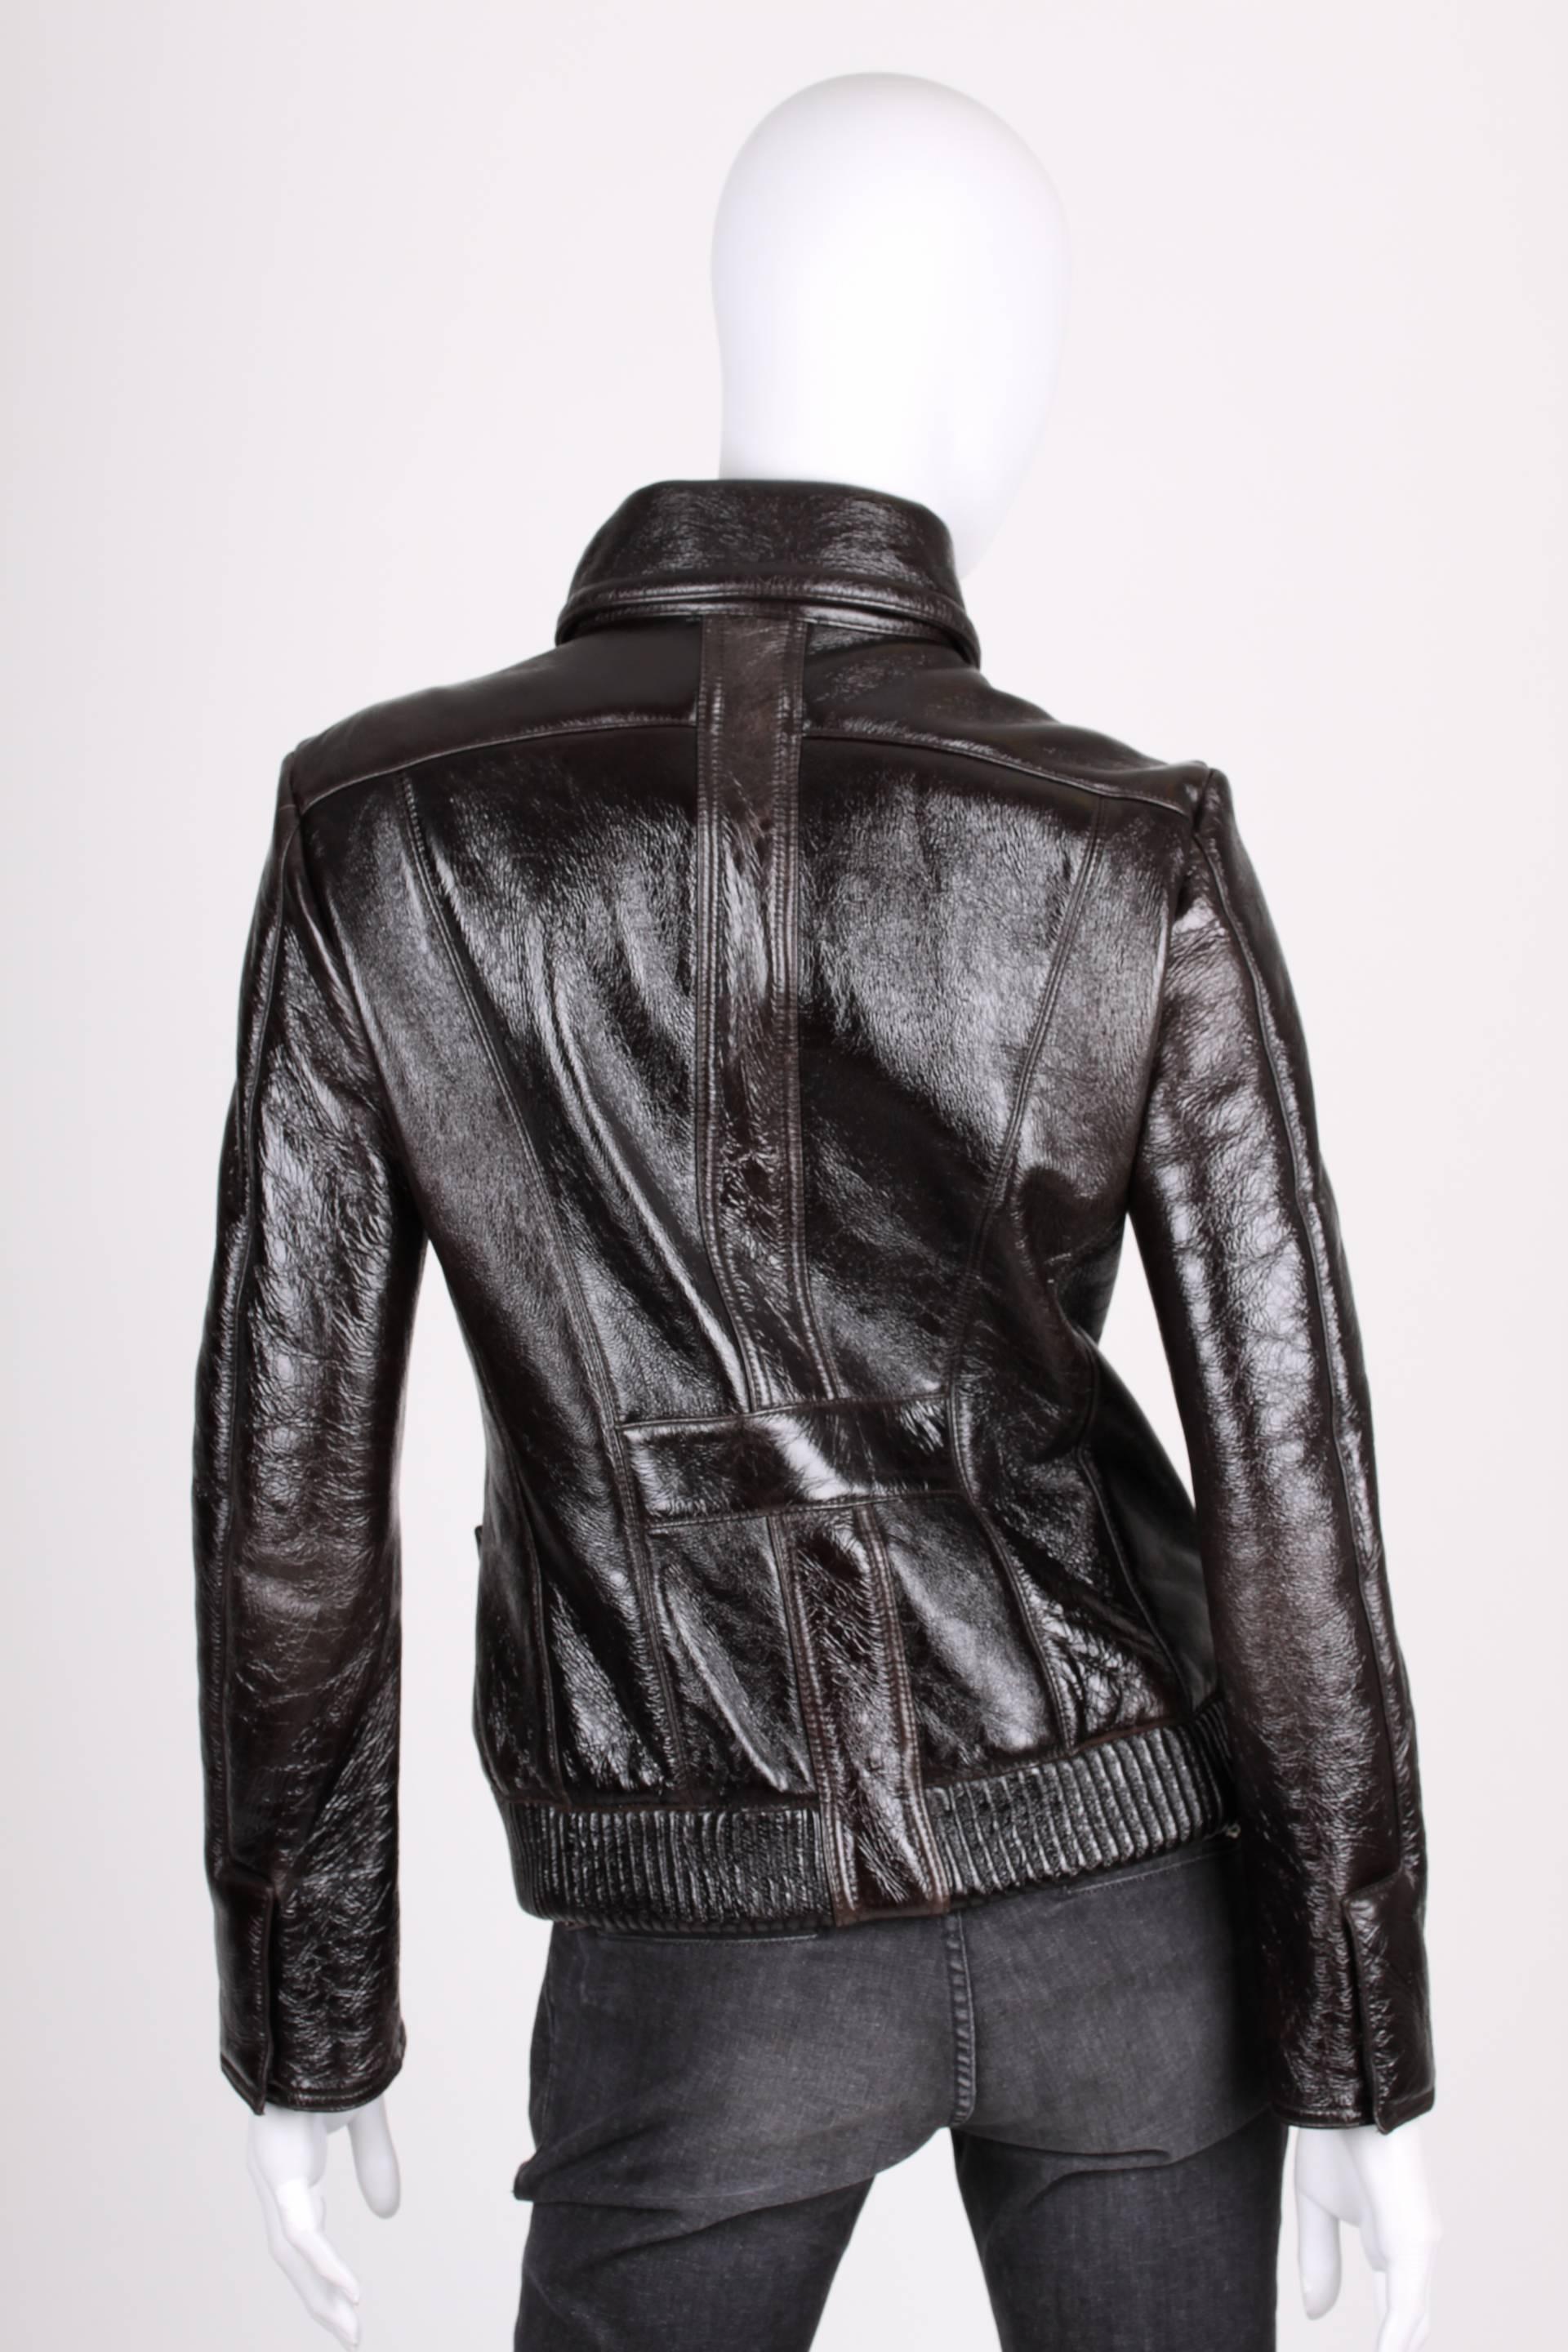 Sturdy jacket by Versace crafted in shiny black leather. We like!!

A round collar with two large silver-tone push buttons with a VJC logo on top. Front closure with a silver-tone zipper, long sleeves, horizontal welt pockets and three zipped